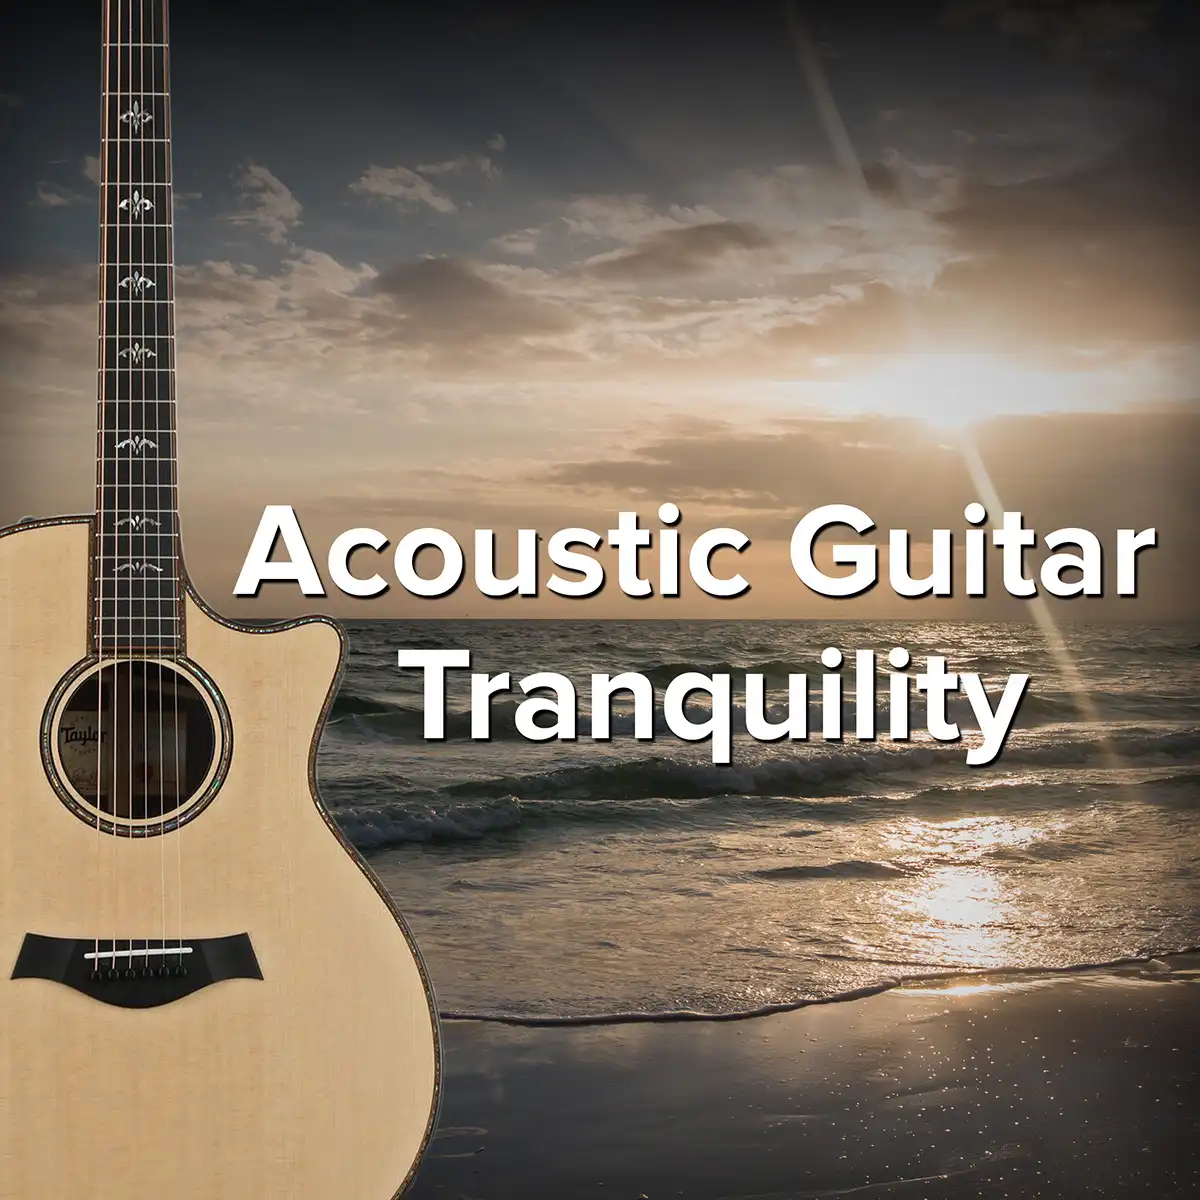 acoustic-guitar-tranquility-2021-ig